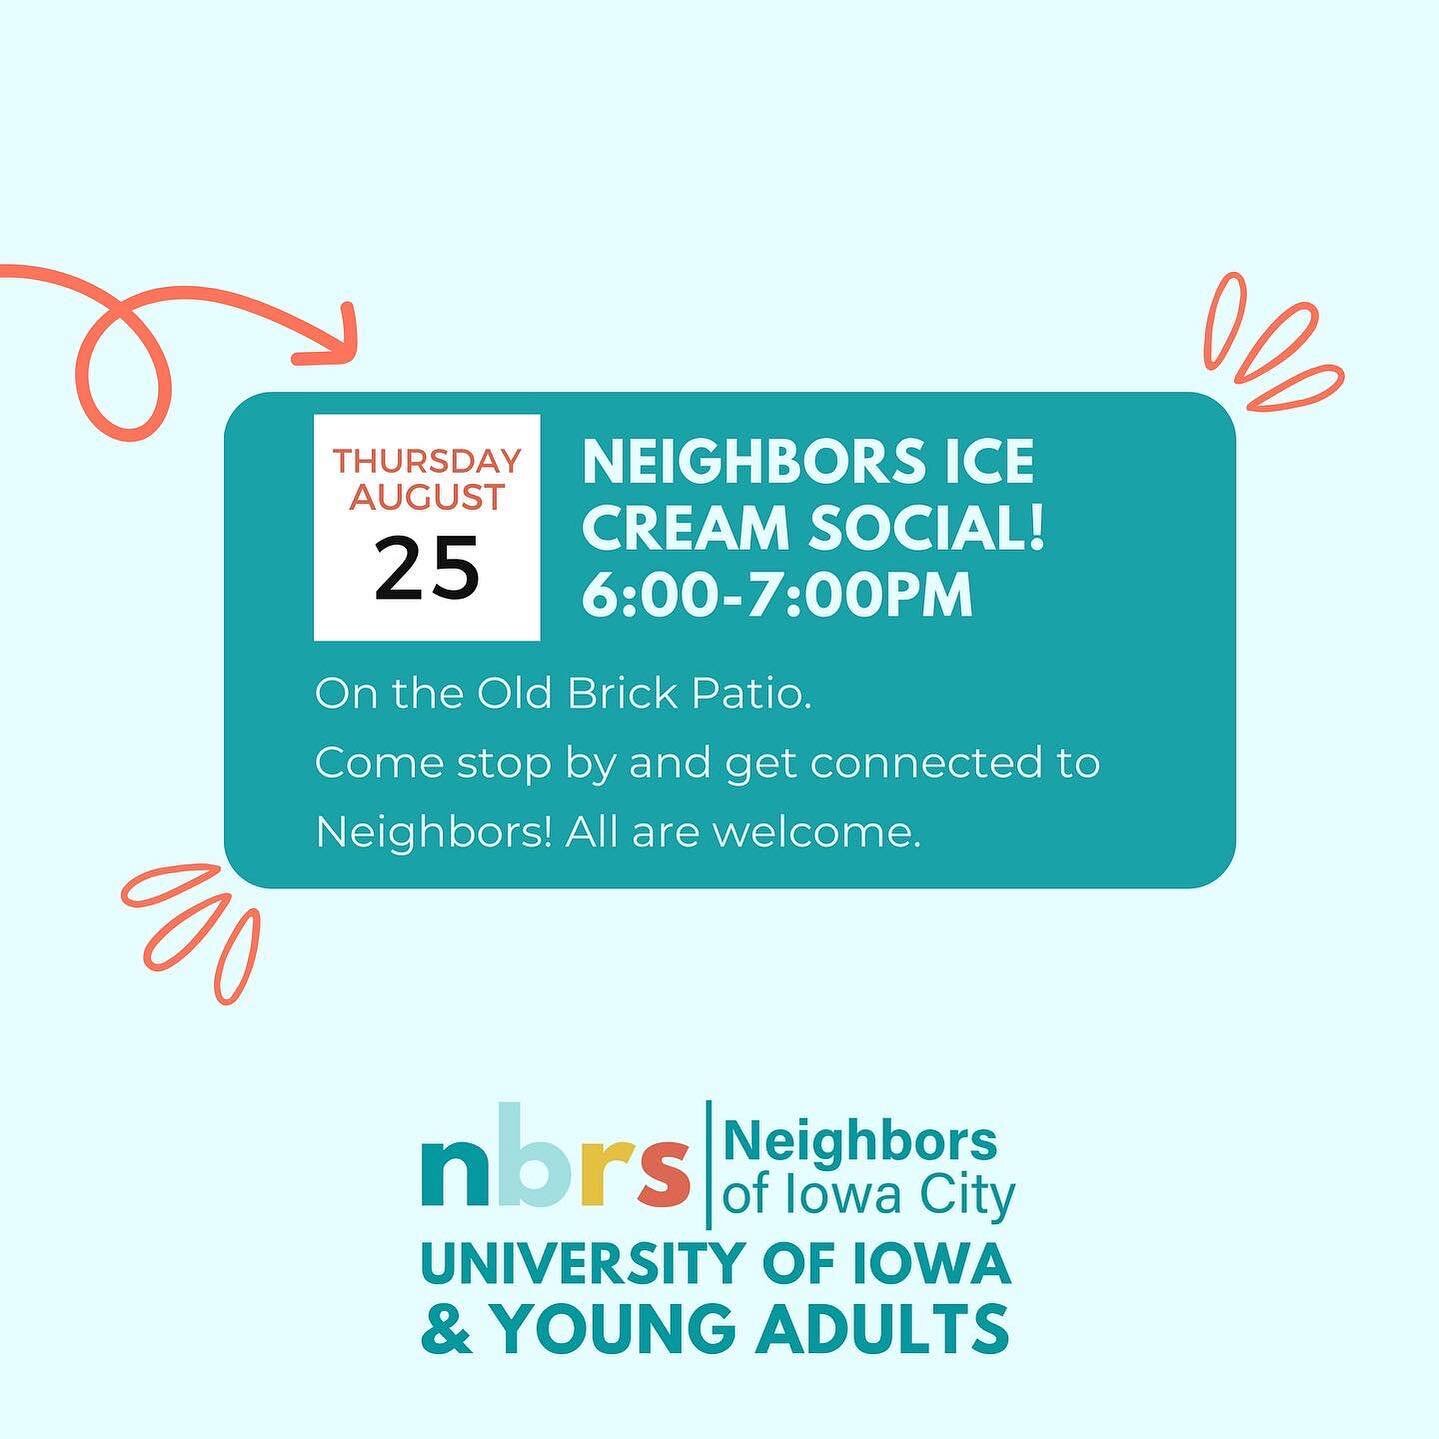 Tonight come stop by our Neighbors College ice cream social to kick off the fall! 6-7pm on the Old Brick patio @ 26 E Market St.

Share and spread the word!

#Neighbors #IowaCity #UIOWA #Kirkwood #LoveYourNeighbor